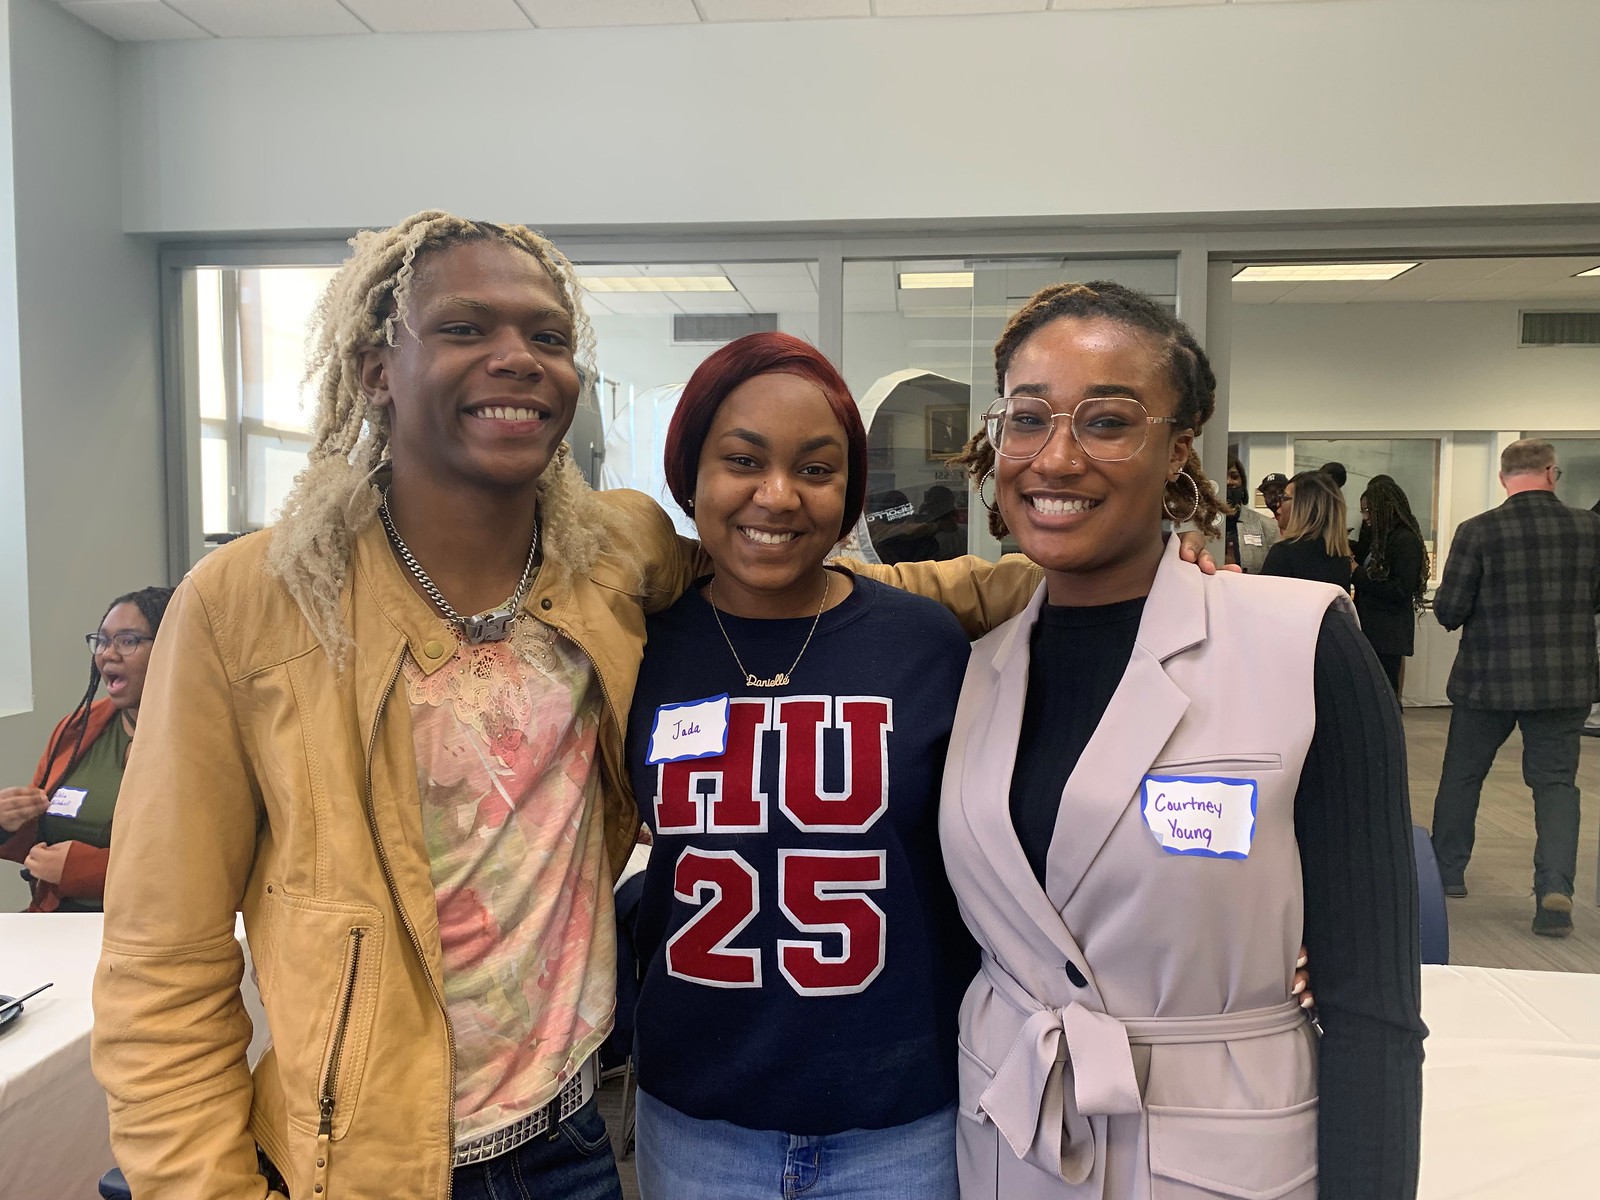 From left: FOSSI scholars Jalen Mays, Jada Horton, and Courtney Young